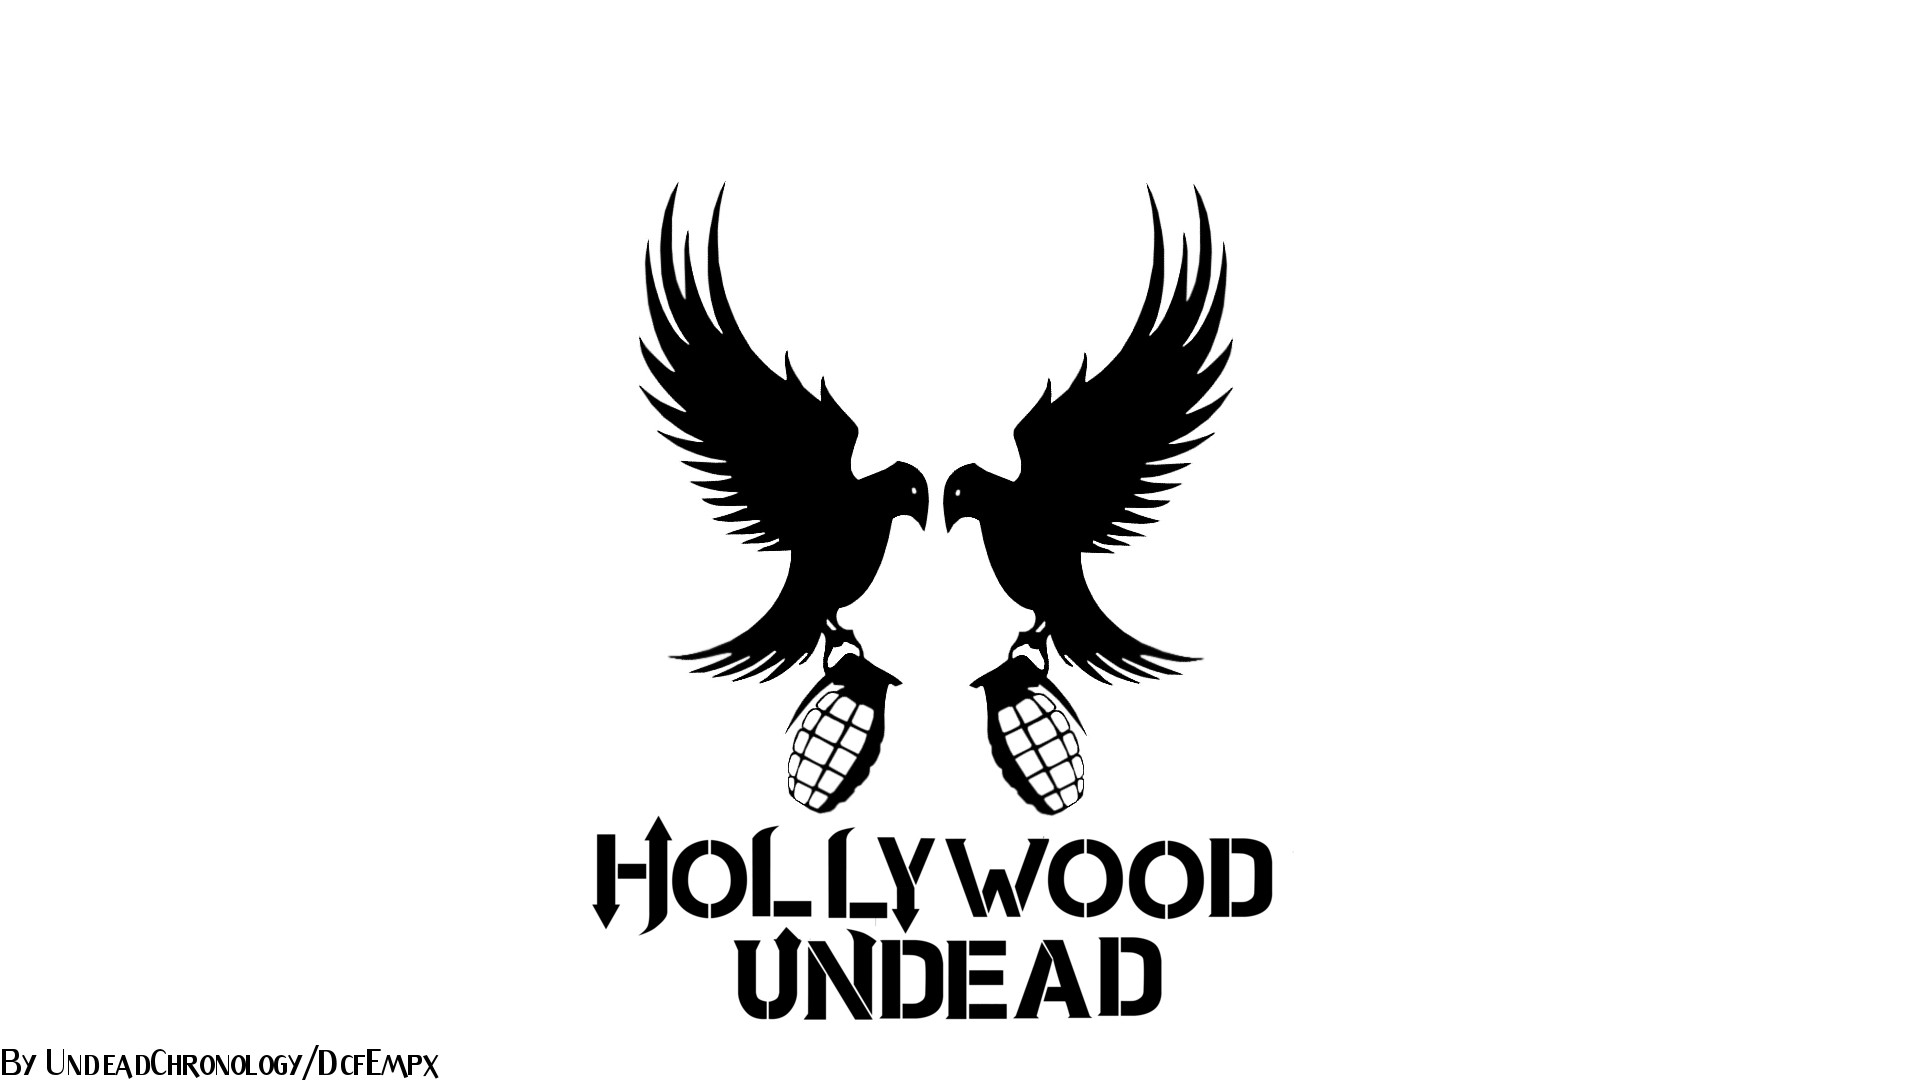 1920x1080 ... Hollywood Undead Wallpaper Black and White #2 by DcfEmpx